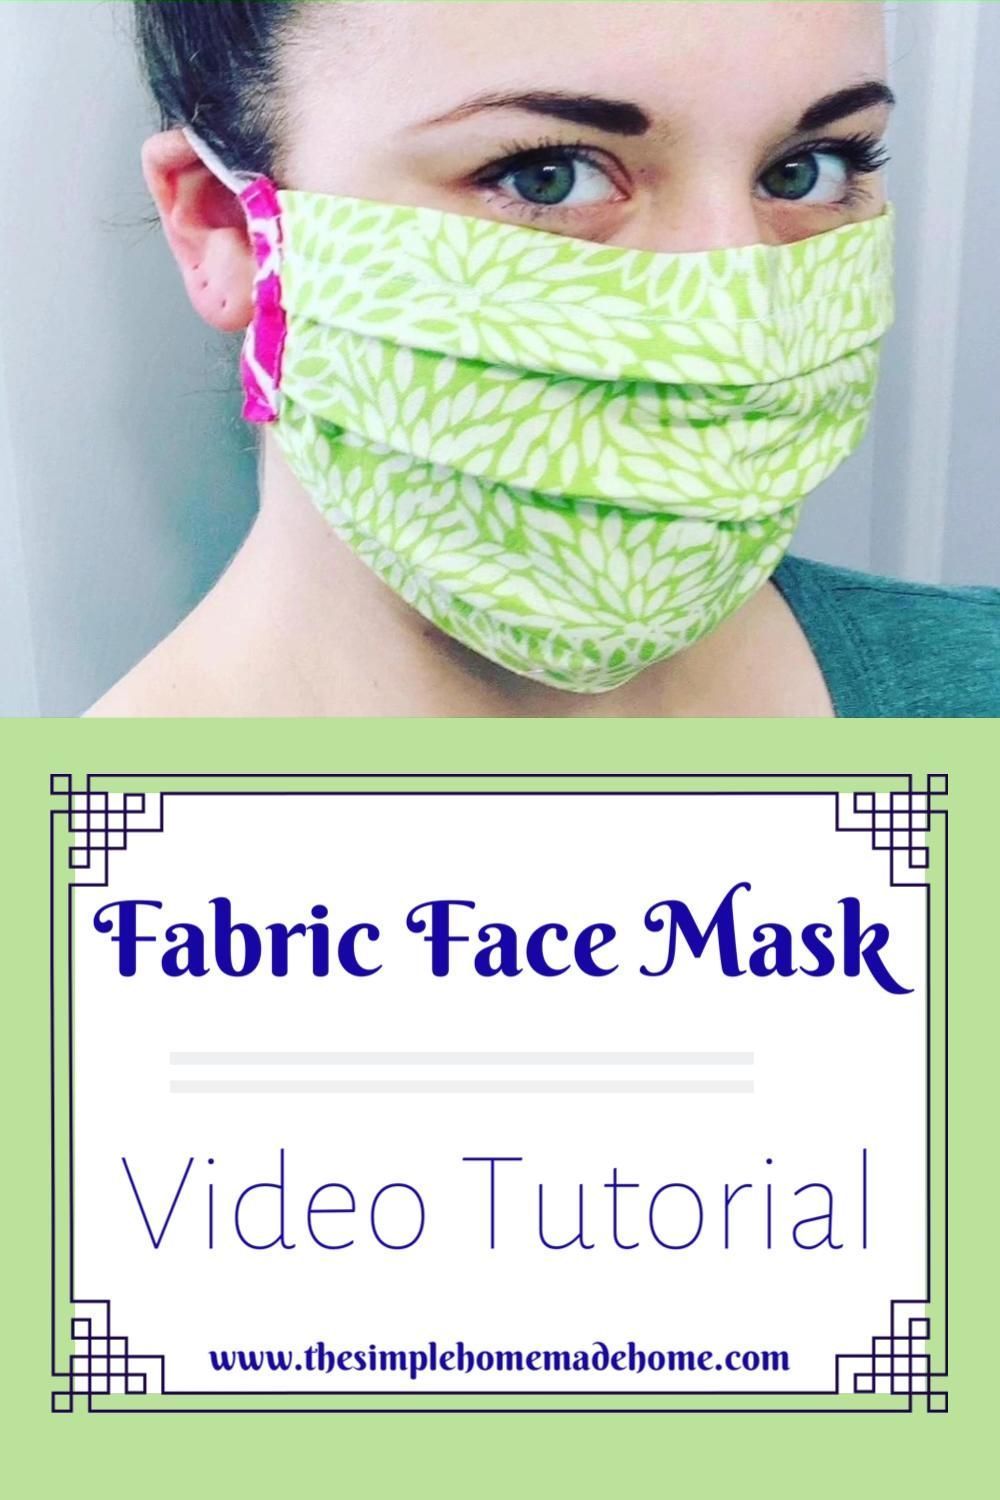 Fabric Face Mask: Sewing Tutorial - The Simple Homemade Home -   22 simple fabric crafts Videos ideas